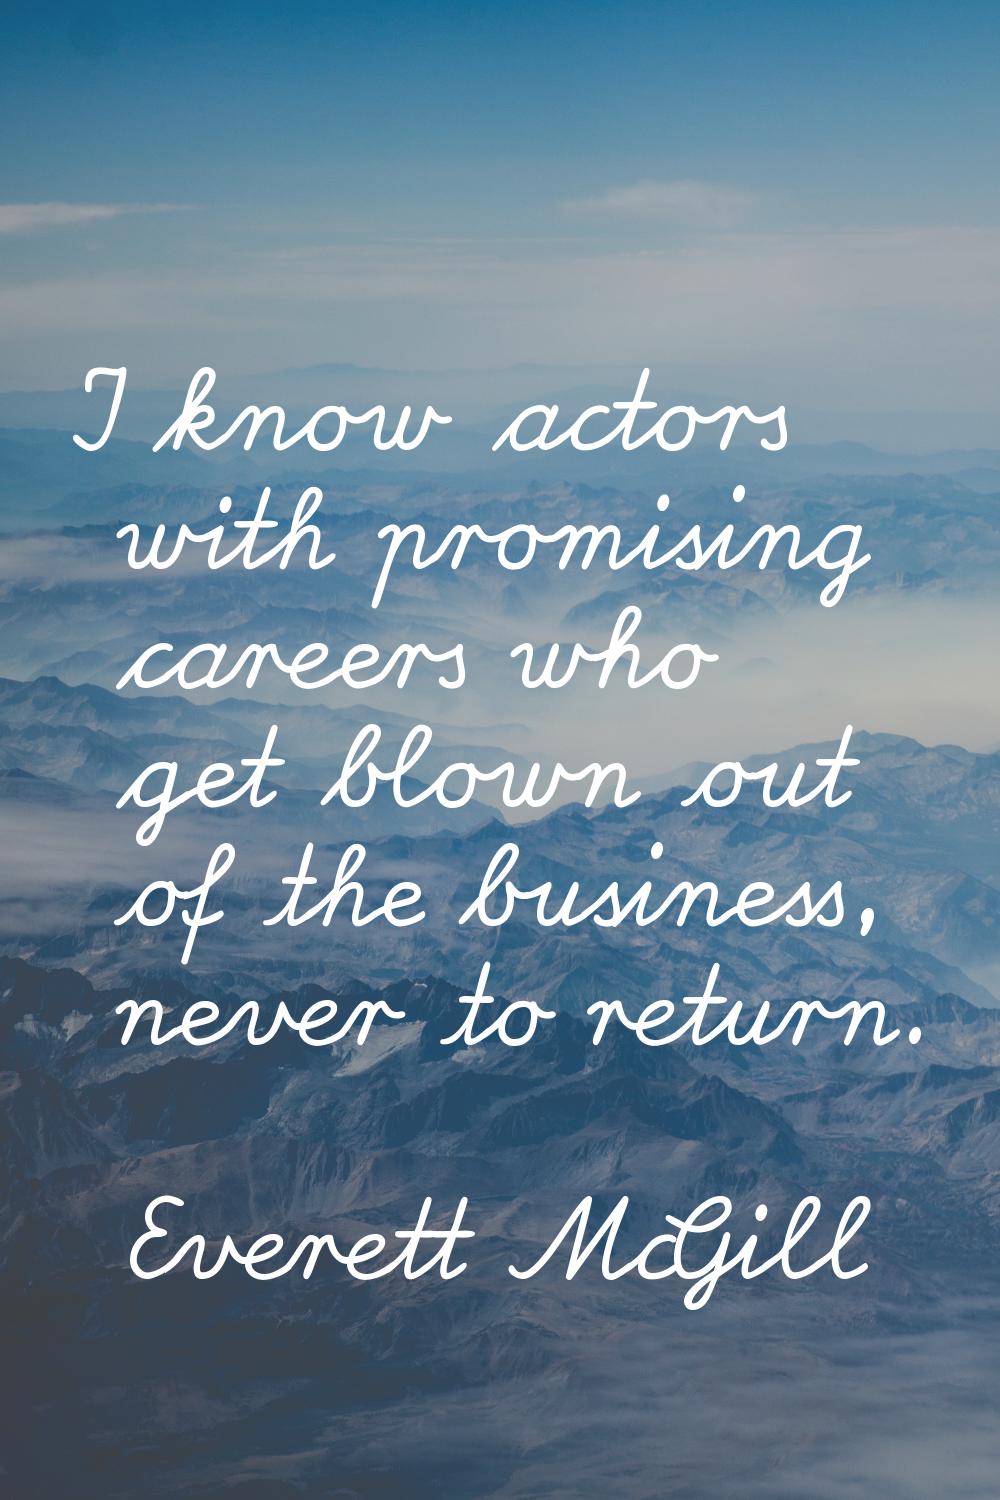 I know actors with promising careers who get blown out of the business, never to return.